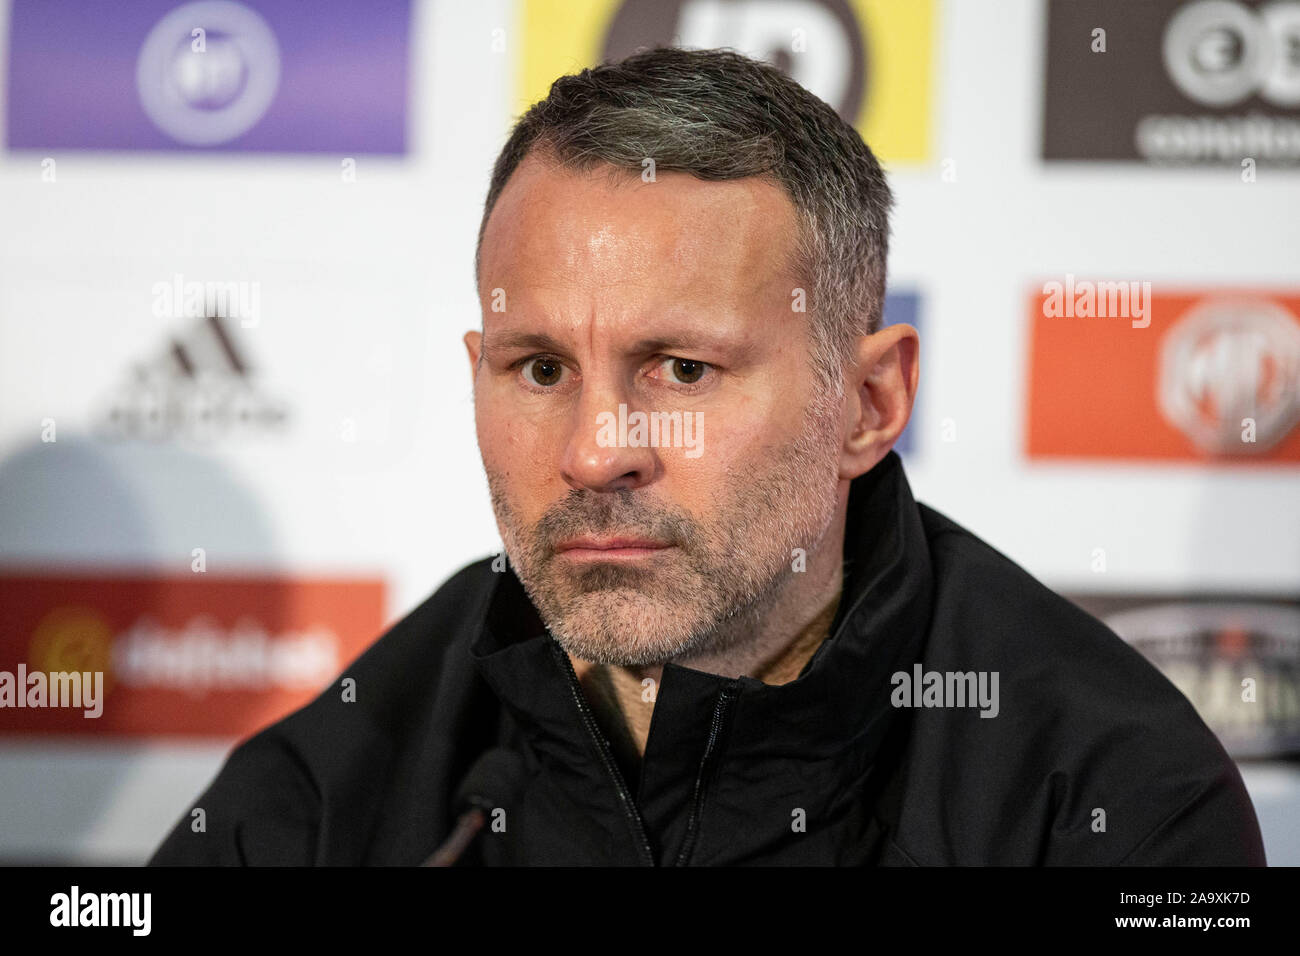 Hensol, Wales, UK, November 18th 2019. Team manager Ryan Giggs during a Wales national football team press conference at Vale Resort ahead of the side's final Euro 2020 group qualification match against Hungary. Credit: Mark Hawkins/Alamy Live News Credit: Mark Hawkins/Alamy Live News Stock Photo